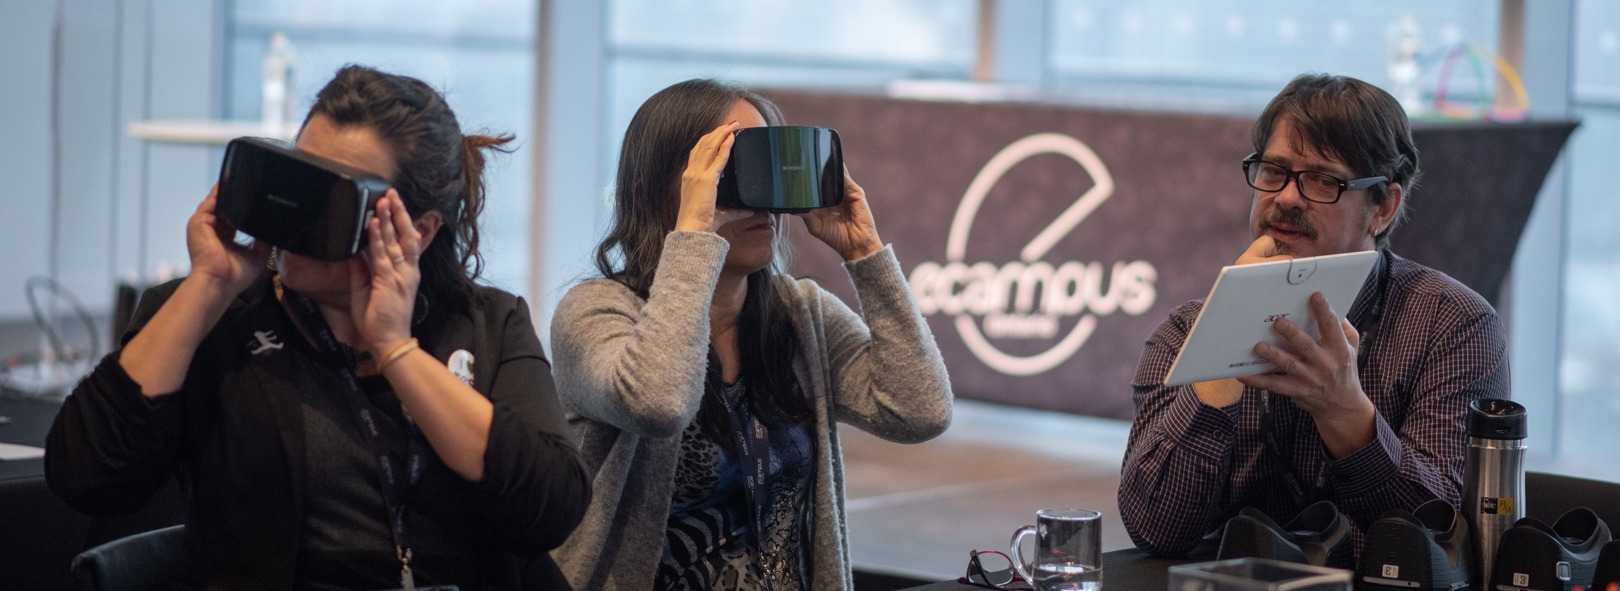 Two women sit at a table with virtual reality headsets, while a man with a notebook looks on